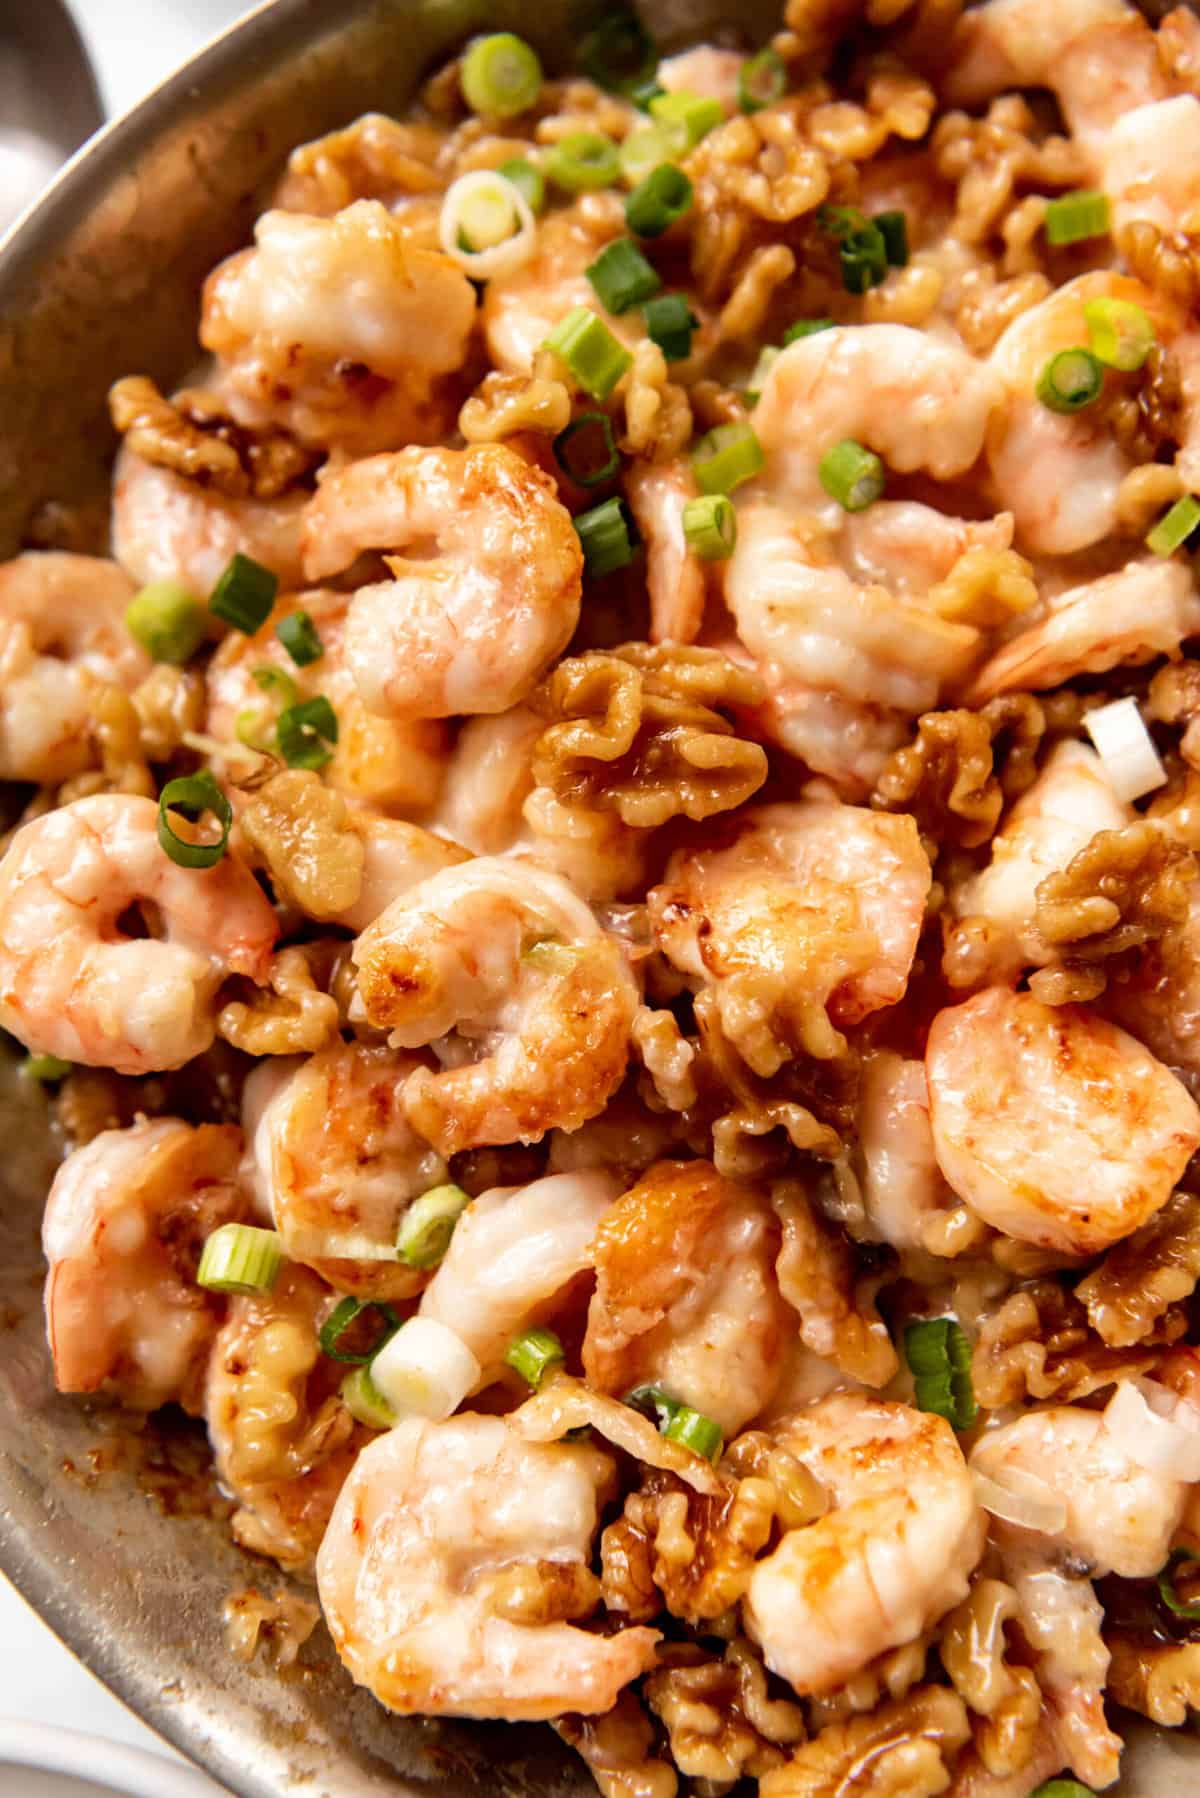 A close image of crispy cooked shrimp with walnuts in a creamy sweet honey sauce.